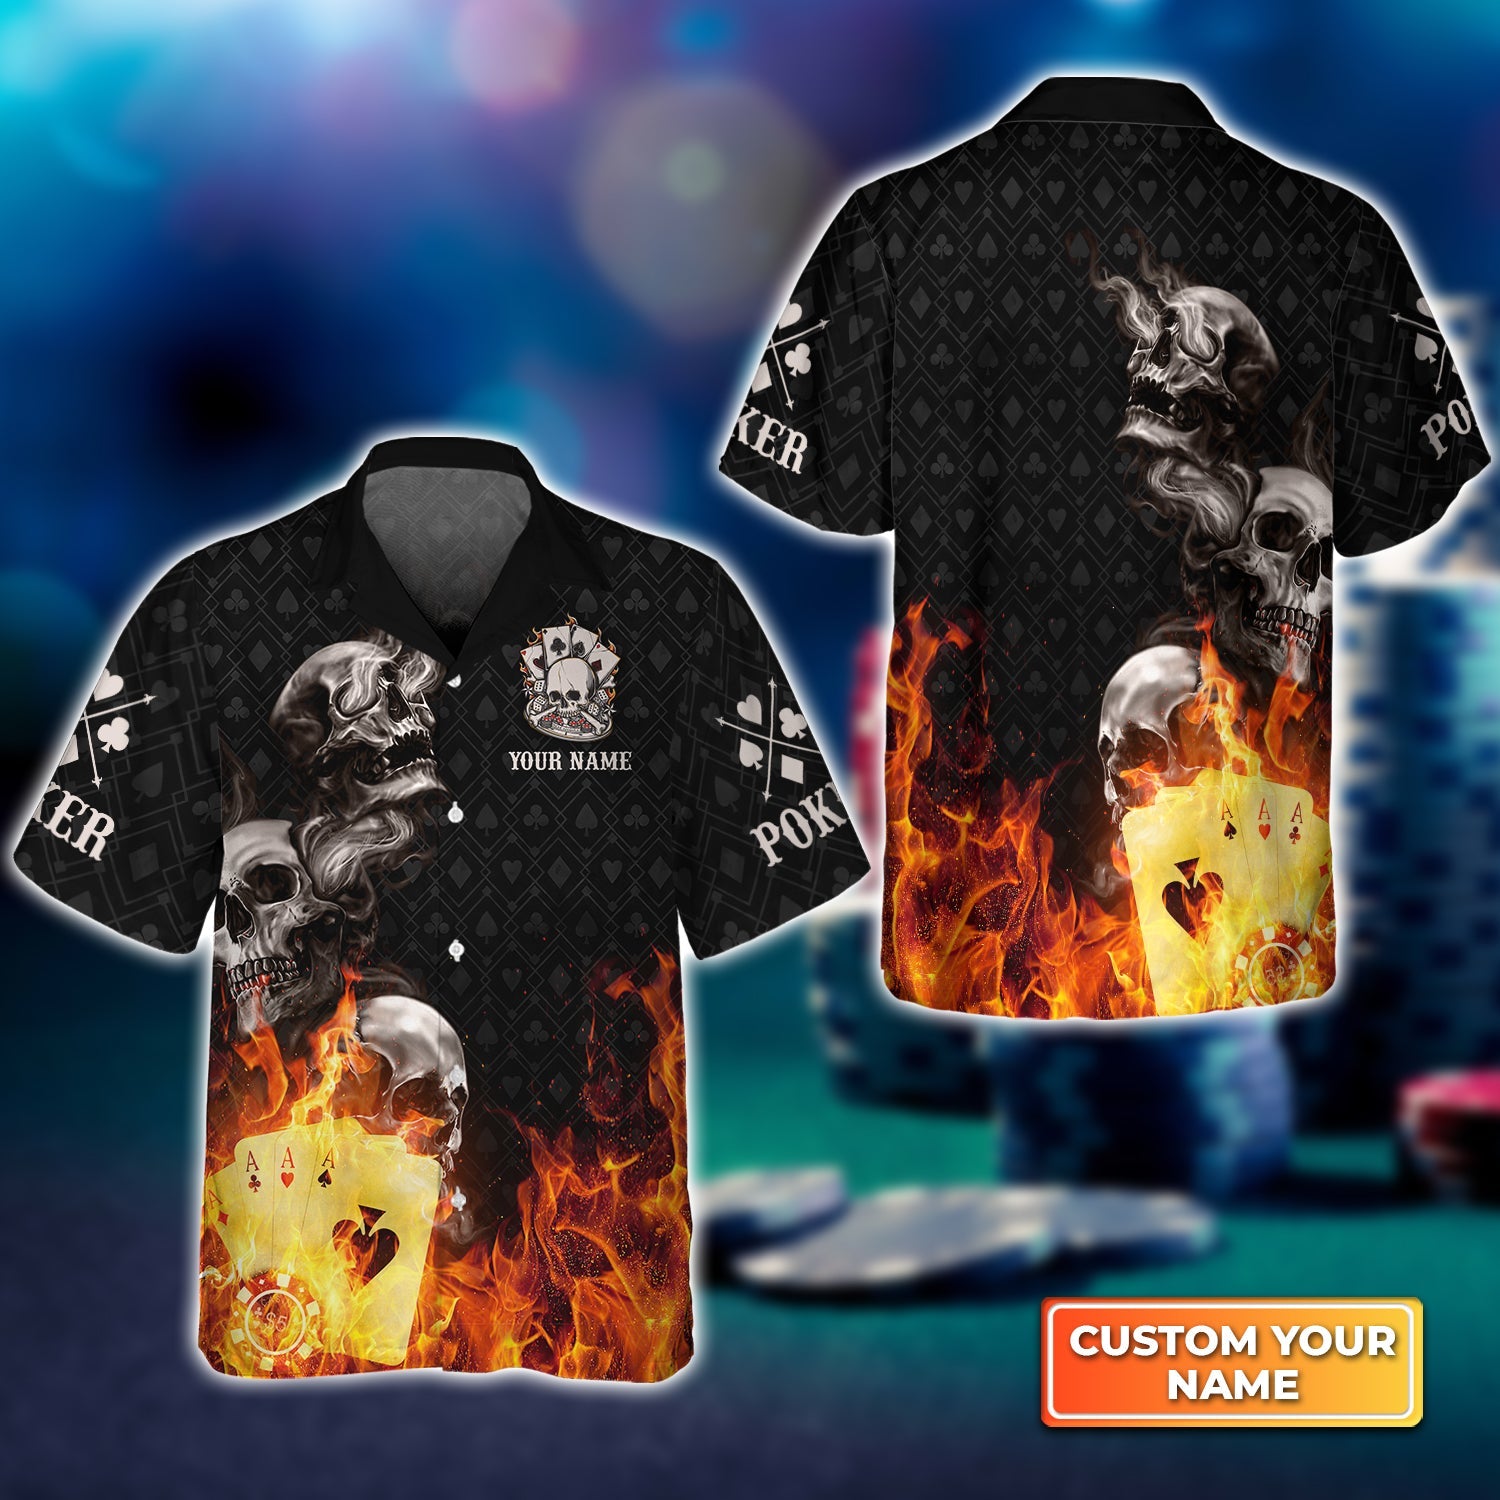 Poker Four Of A Kind Aces Skull On Fire Personalized Name 3D Hawaiian Shirt For Poker Players